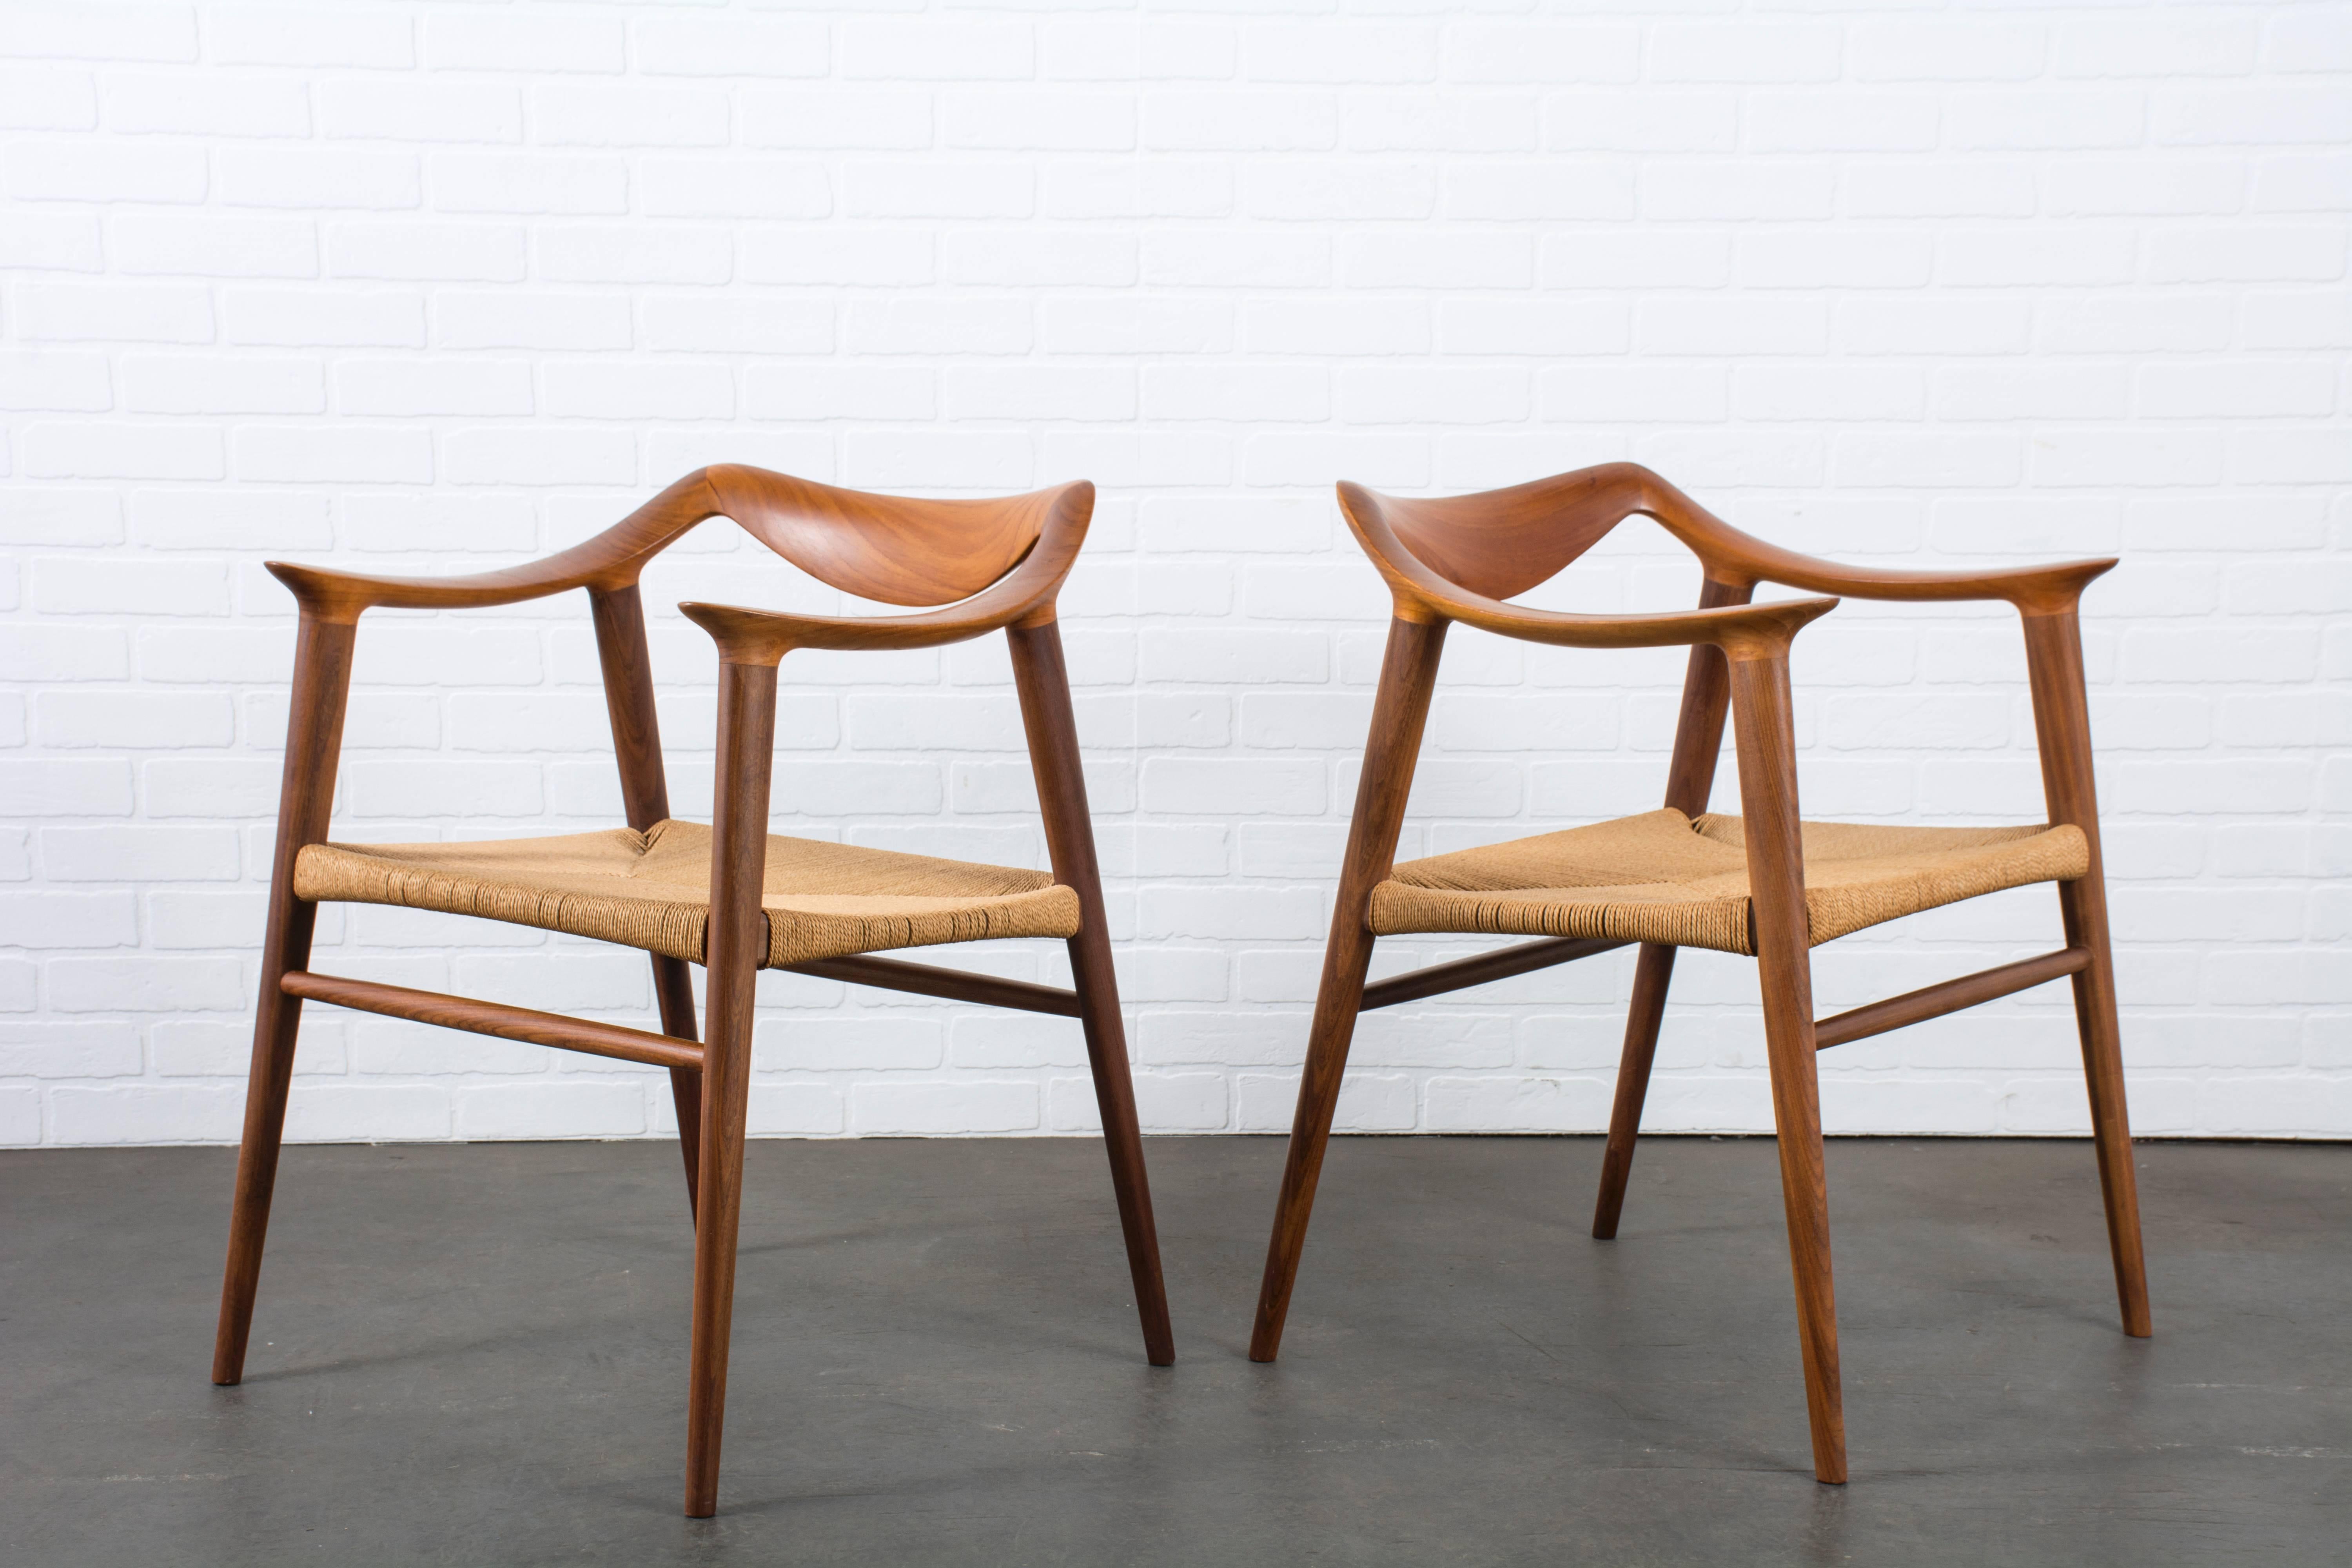 This is a pair of vintage Mid-Century armchairs by Rolf Rastad & Adolf Relling for Gustav Bahus, Norway, circa 1950s. They feature sculptural teak frames and the original paper cord seats.